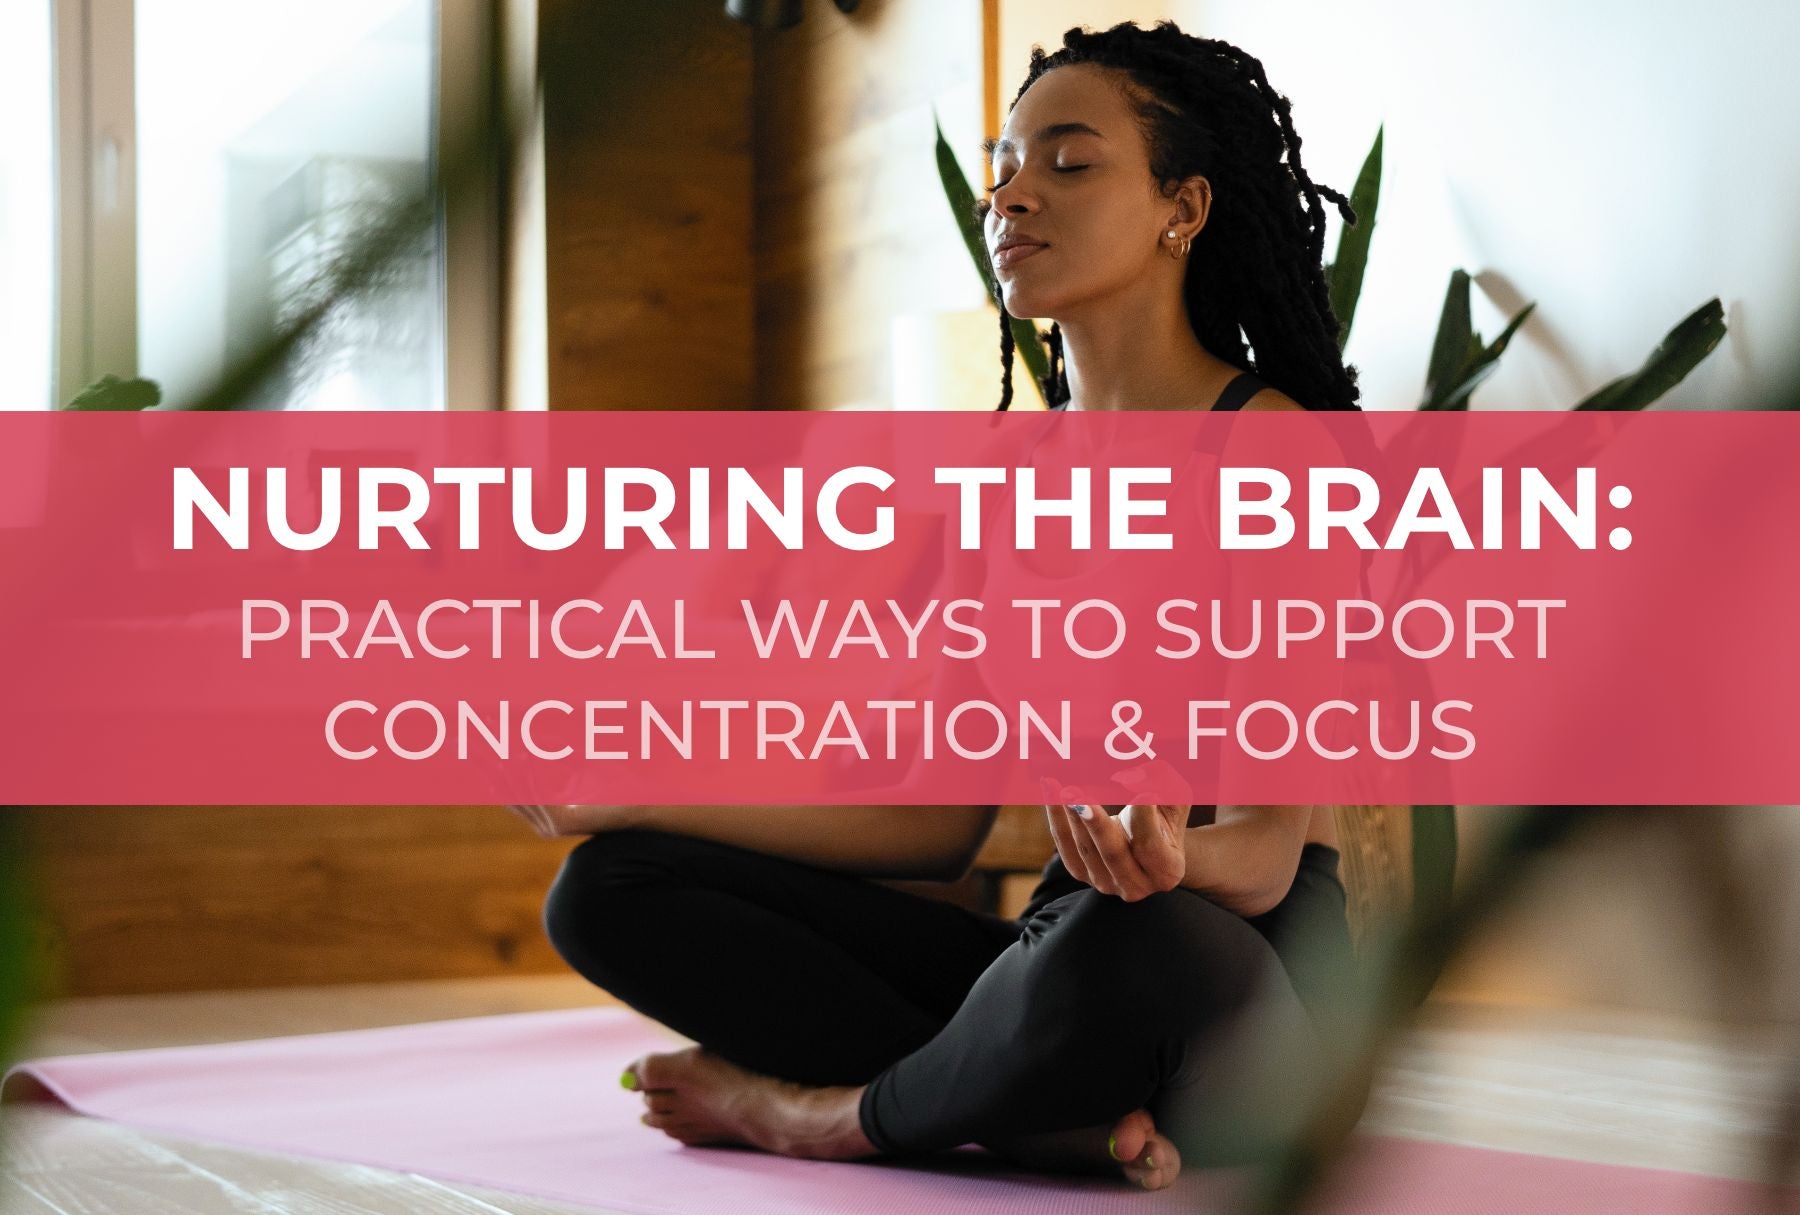 Practical Ways to Support Concentration and Focus with Key Nutrients and Healthy Habits†